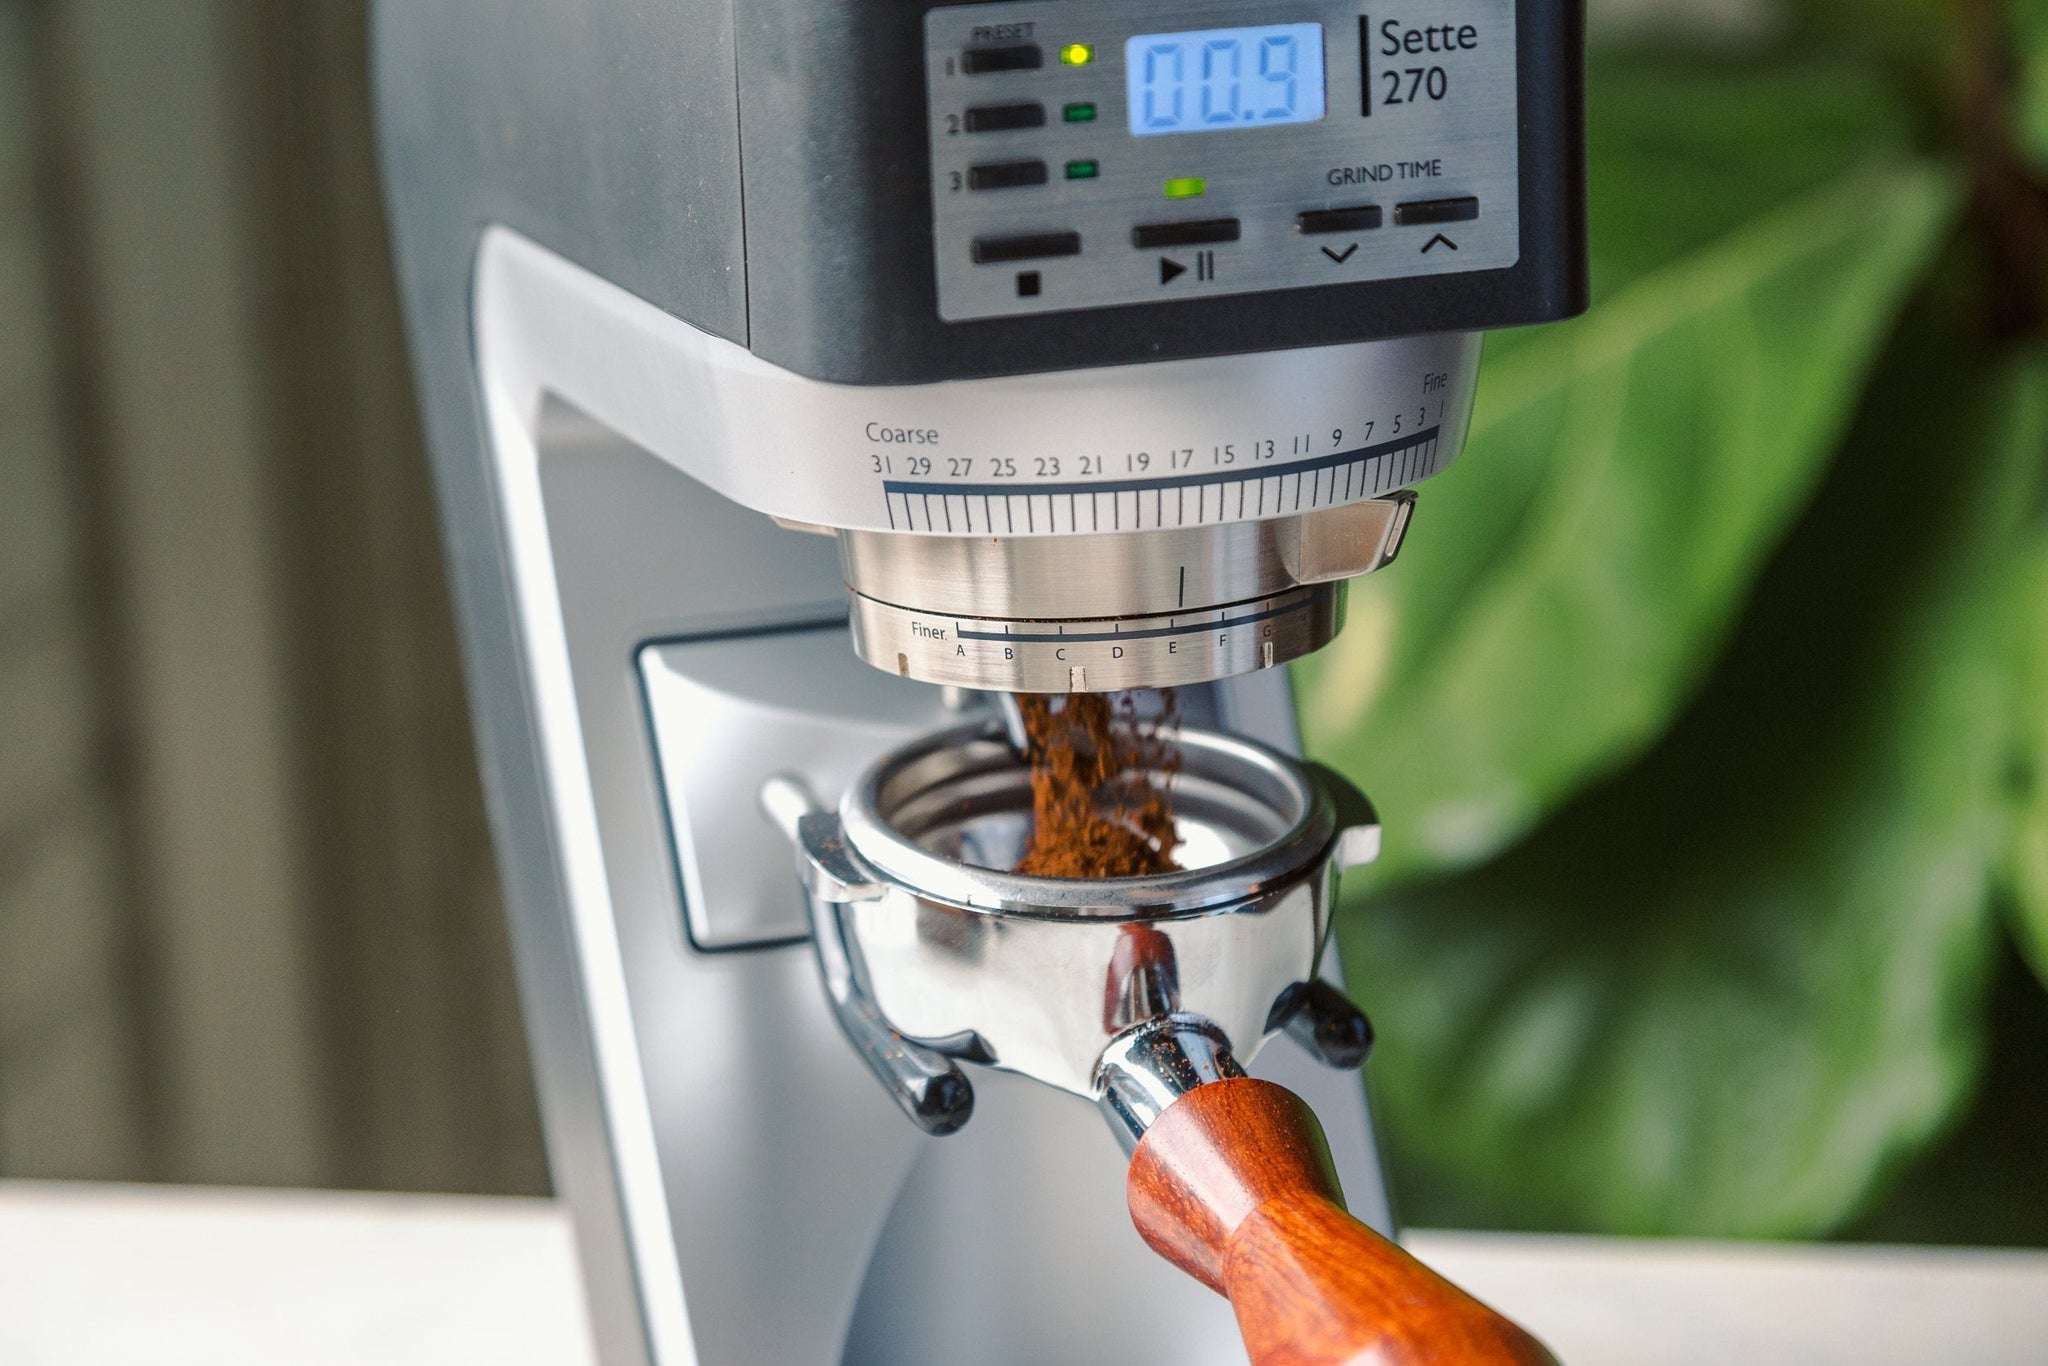 Baratza Sette 270 Grinder with wood portafilter, from Clive Coffee, lifestyle